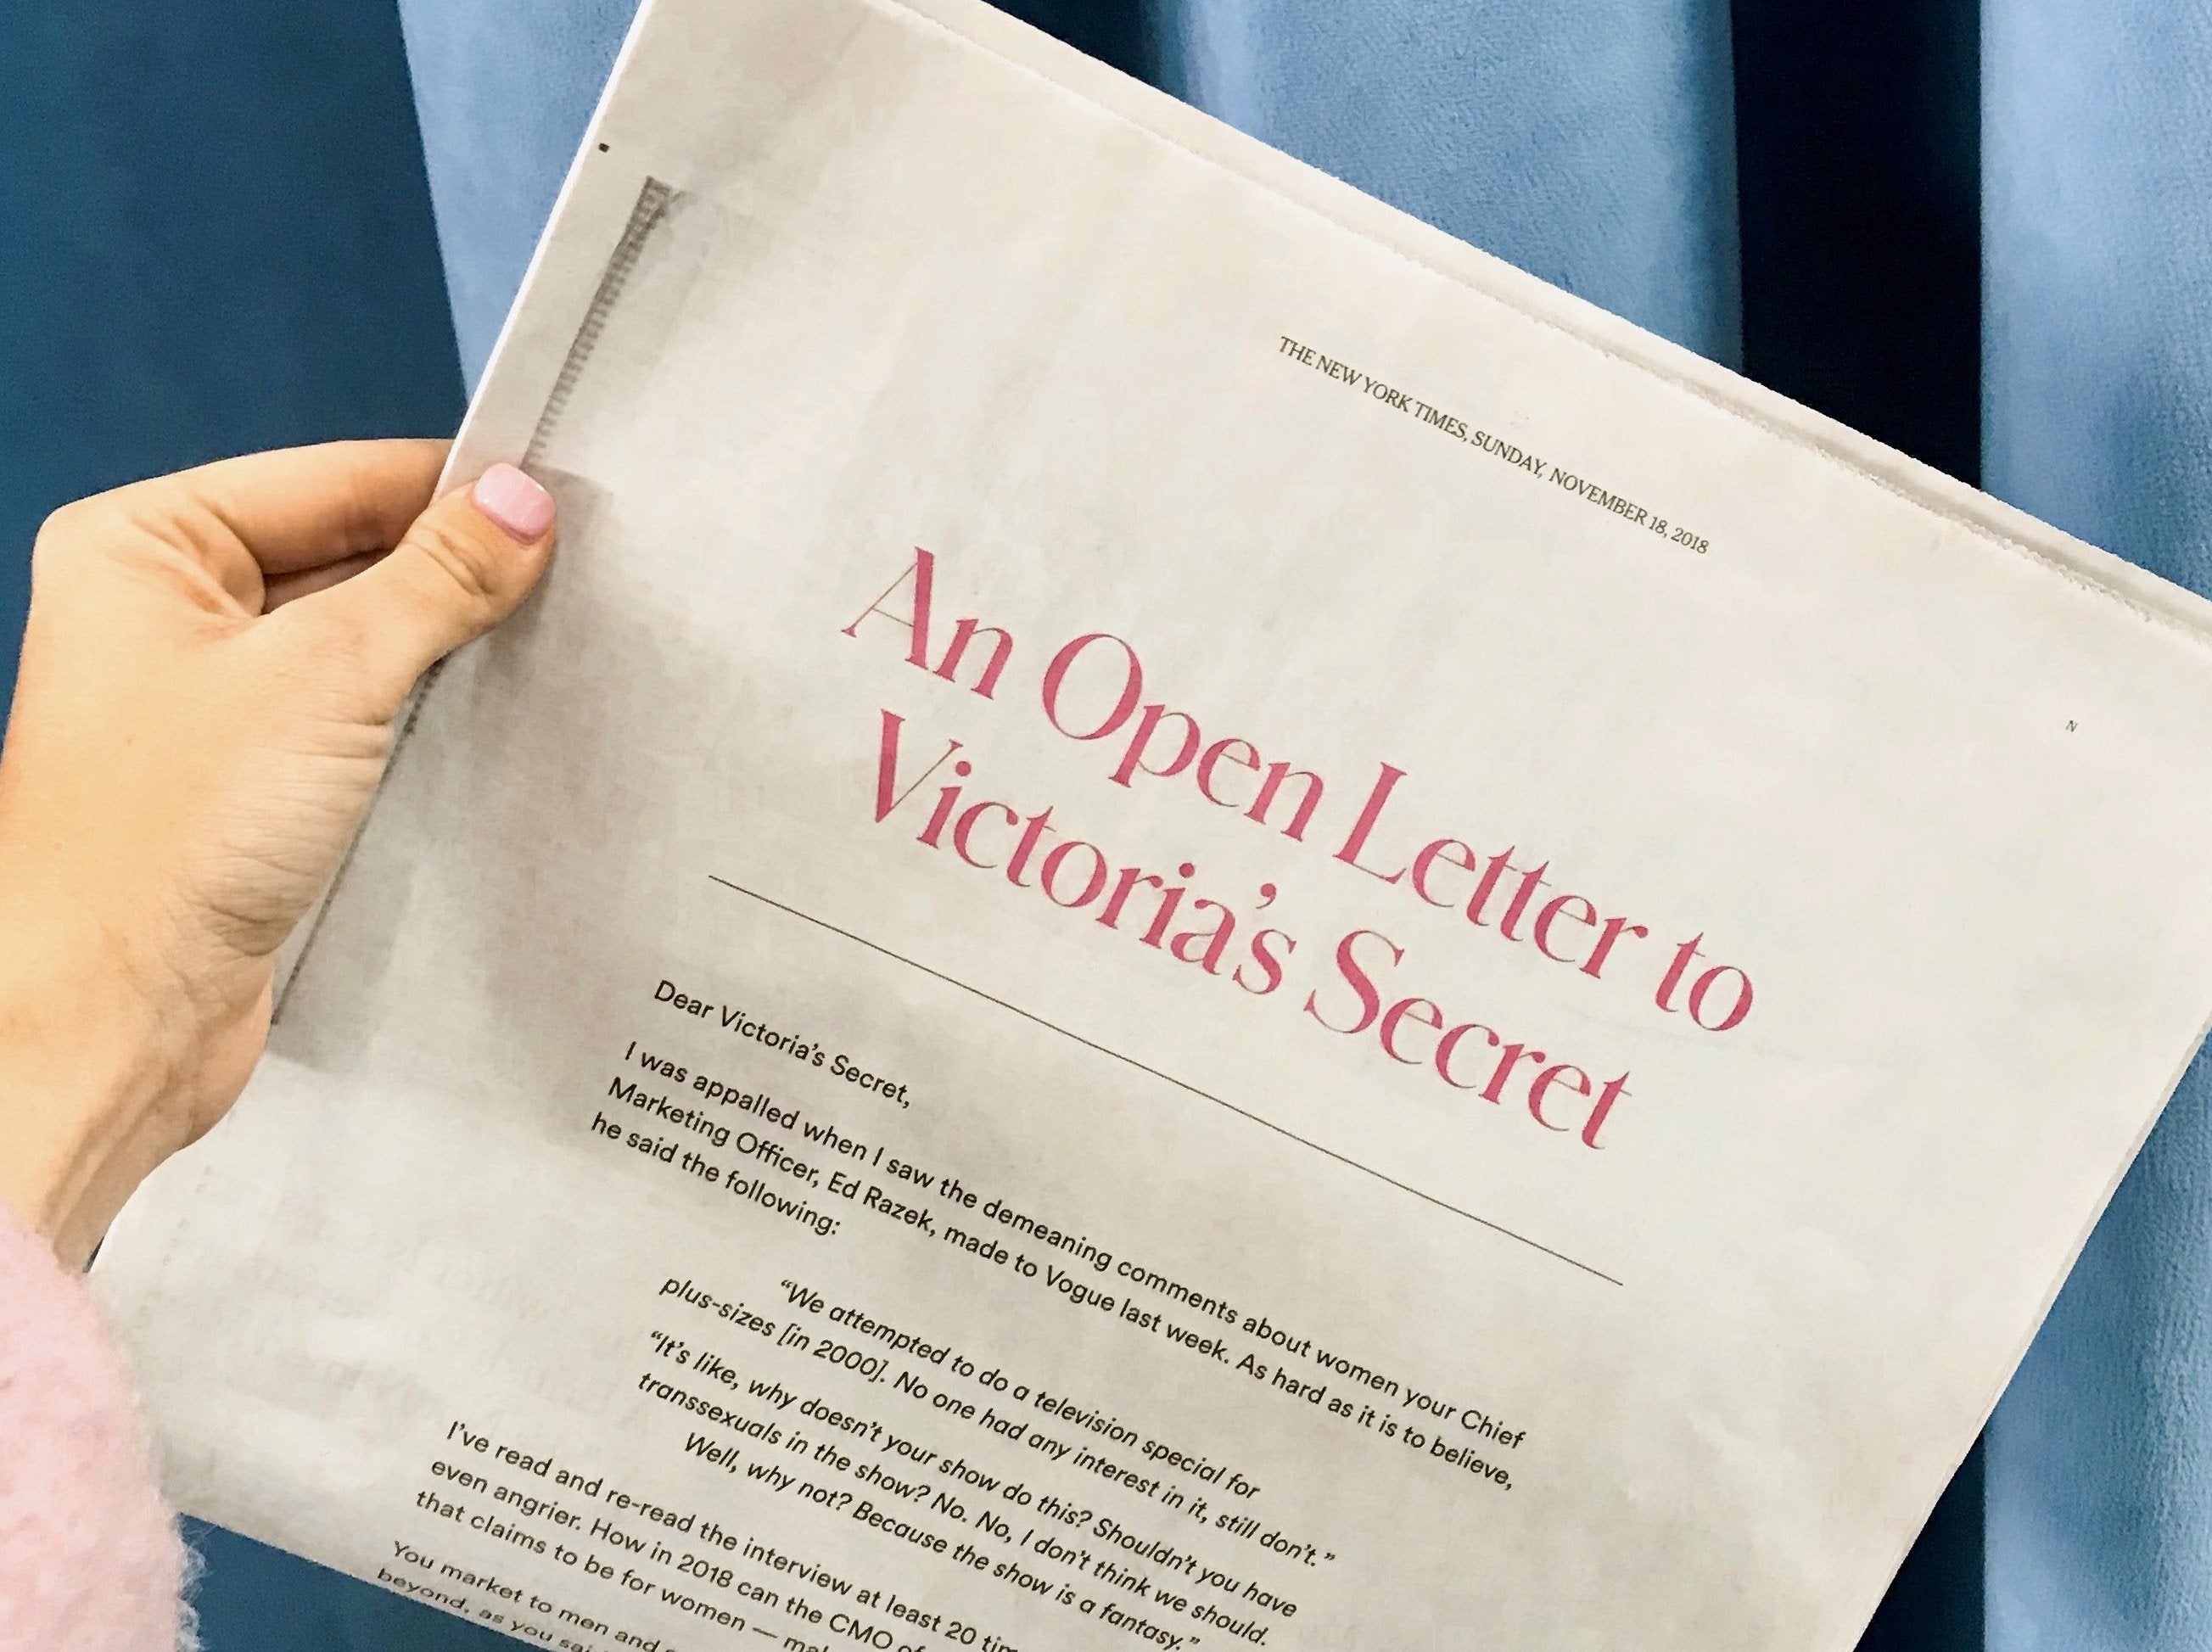 ThirdLove Publishes a Scathing Open Letter to Victoria's Secret in a New  York Times Ad